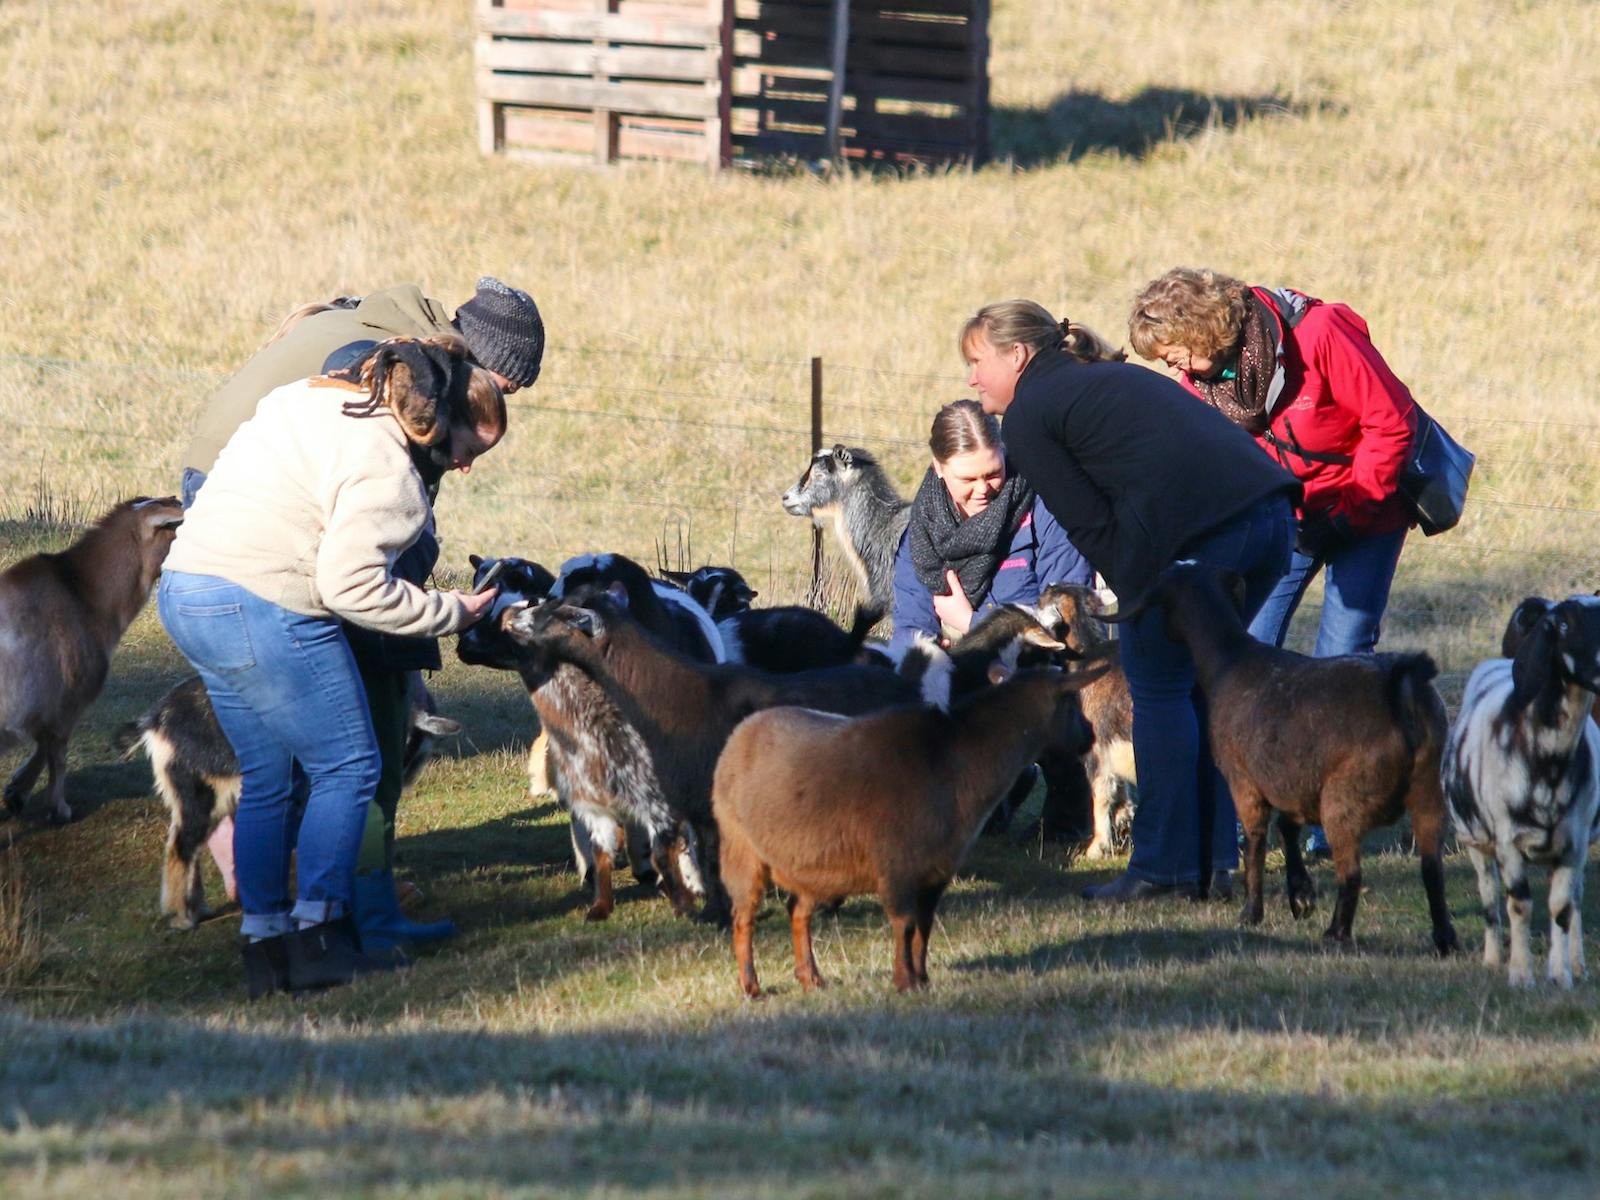 Group of people patting goats